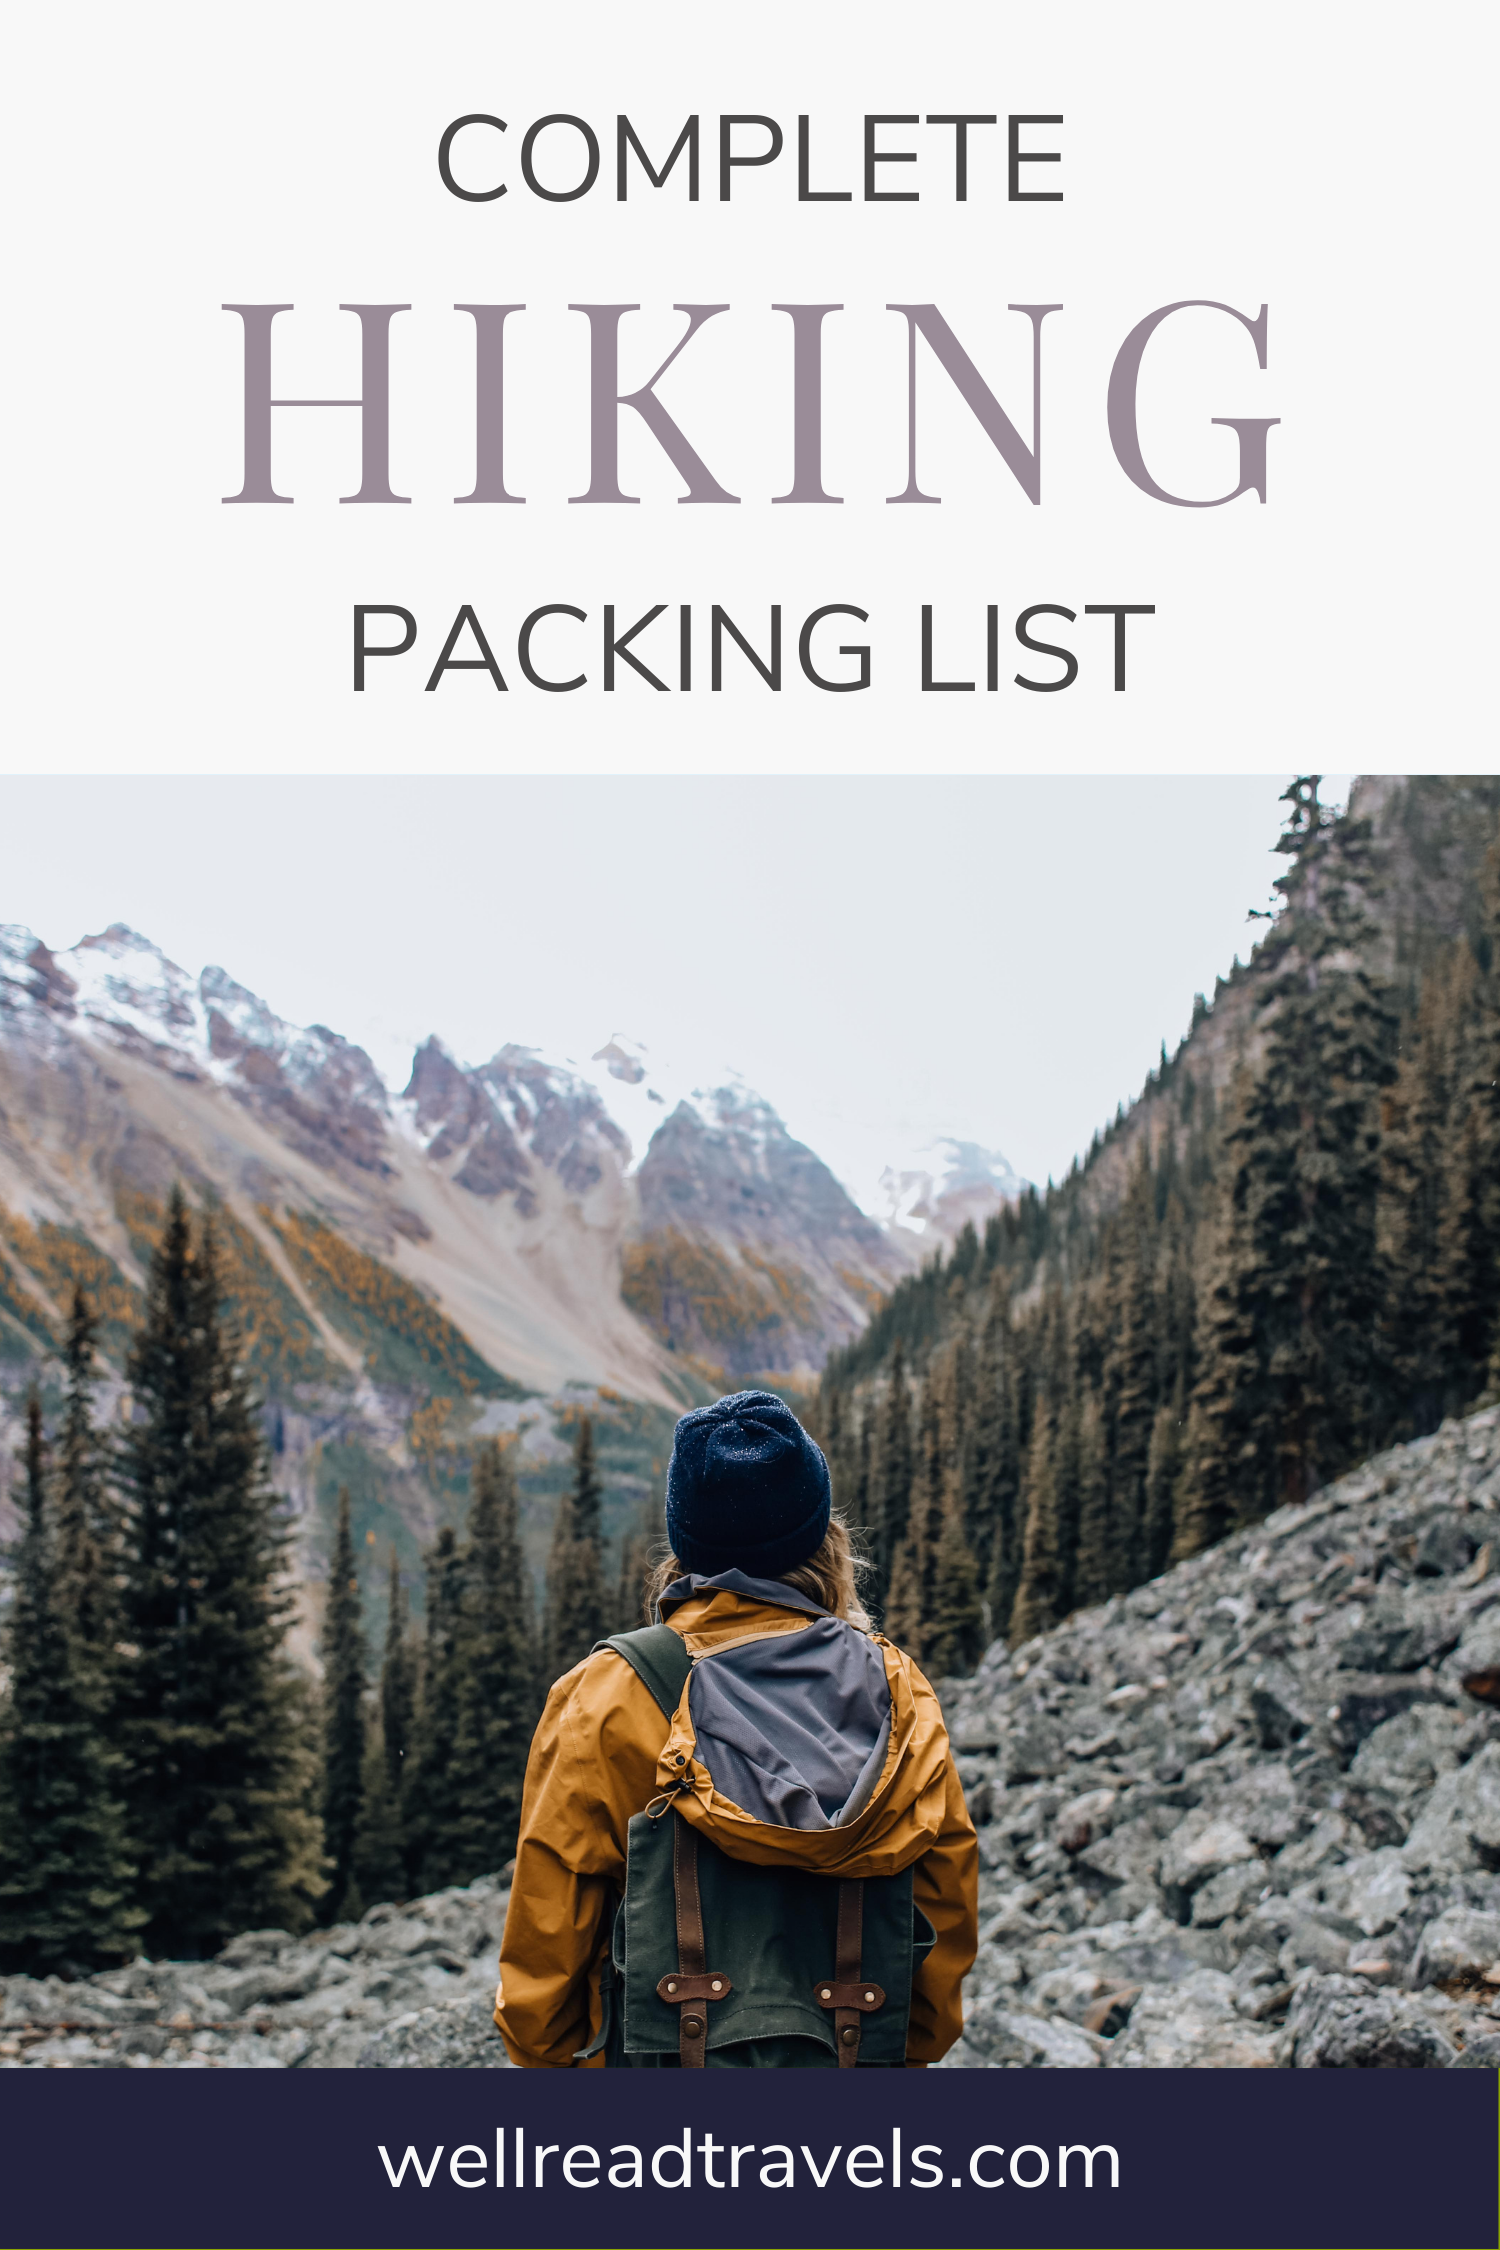 The Complete Hiking Packing List - 10 Essentials & More - Well Read Travels